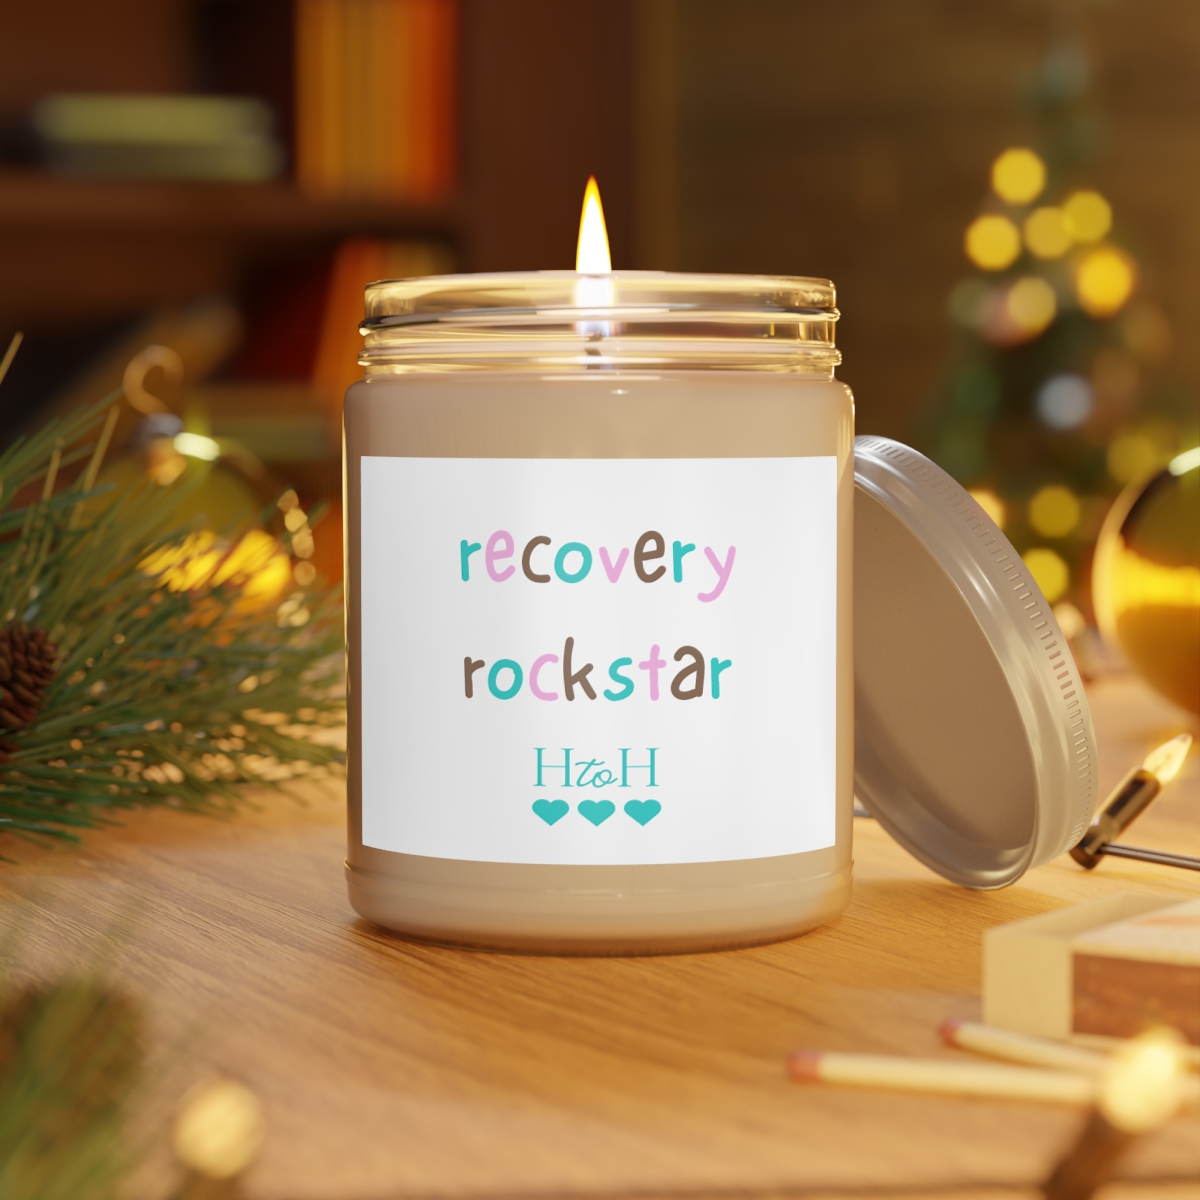 Recovery Rockstar - Scented Candles, 9oz product thumbnail image